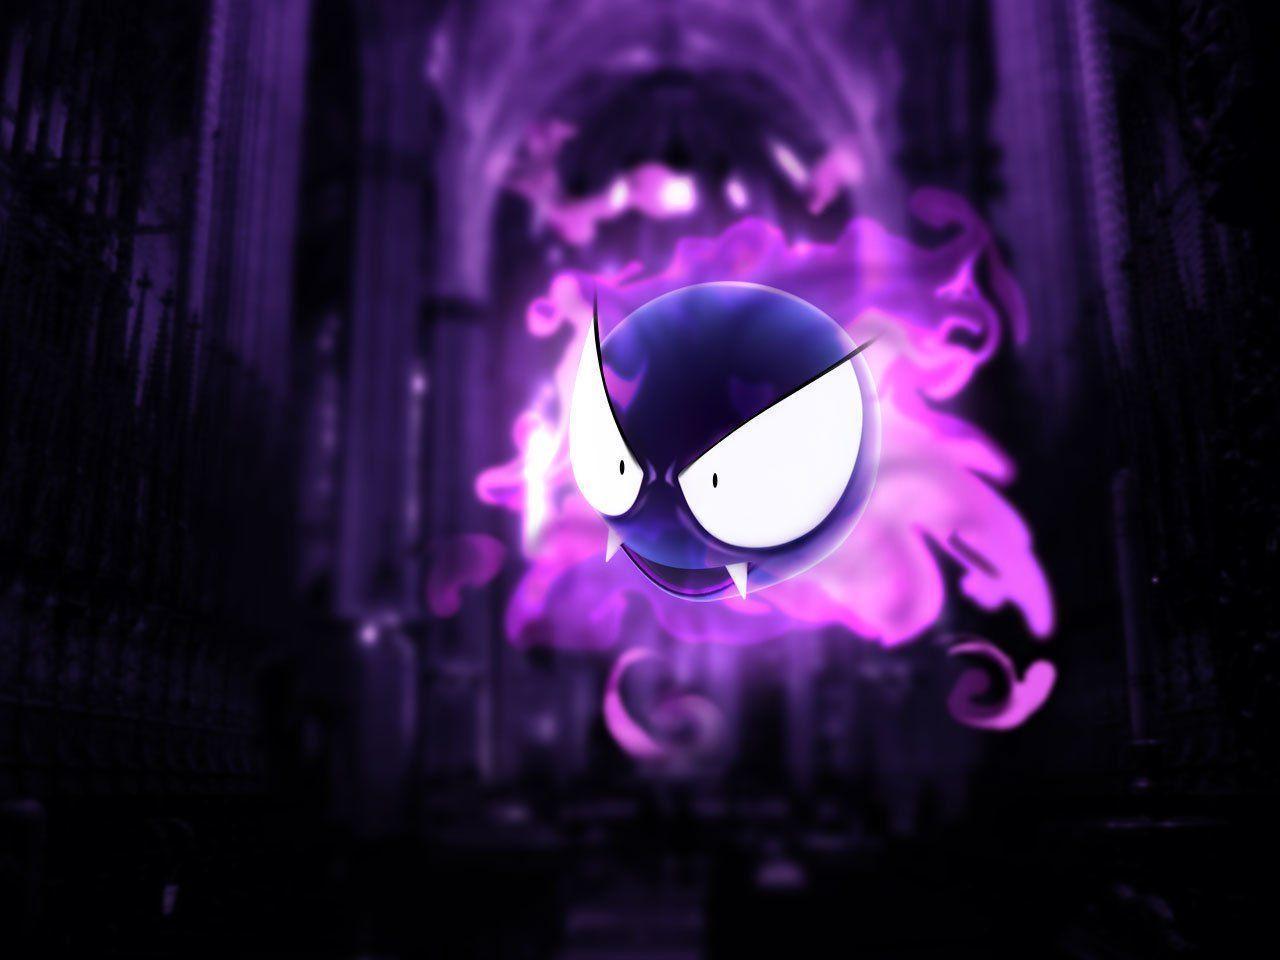 Gastly (Pokémon) HD Wallpaper and Background Image